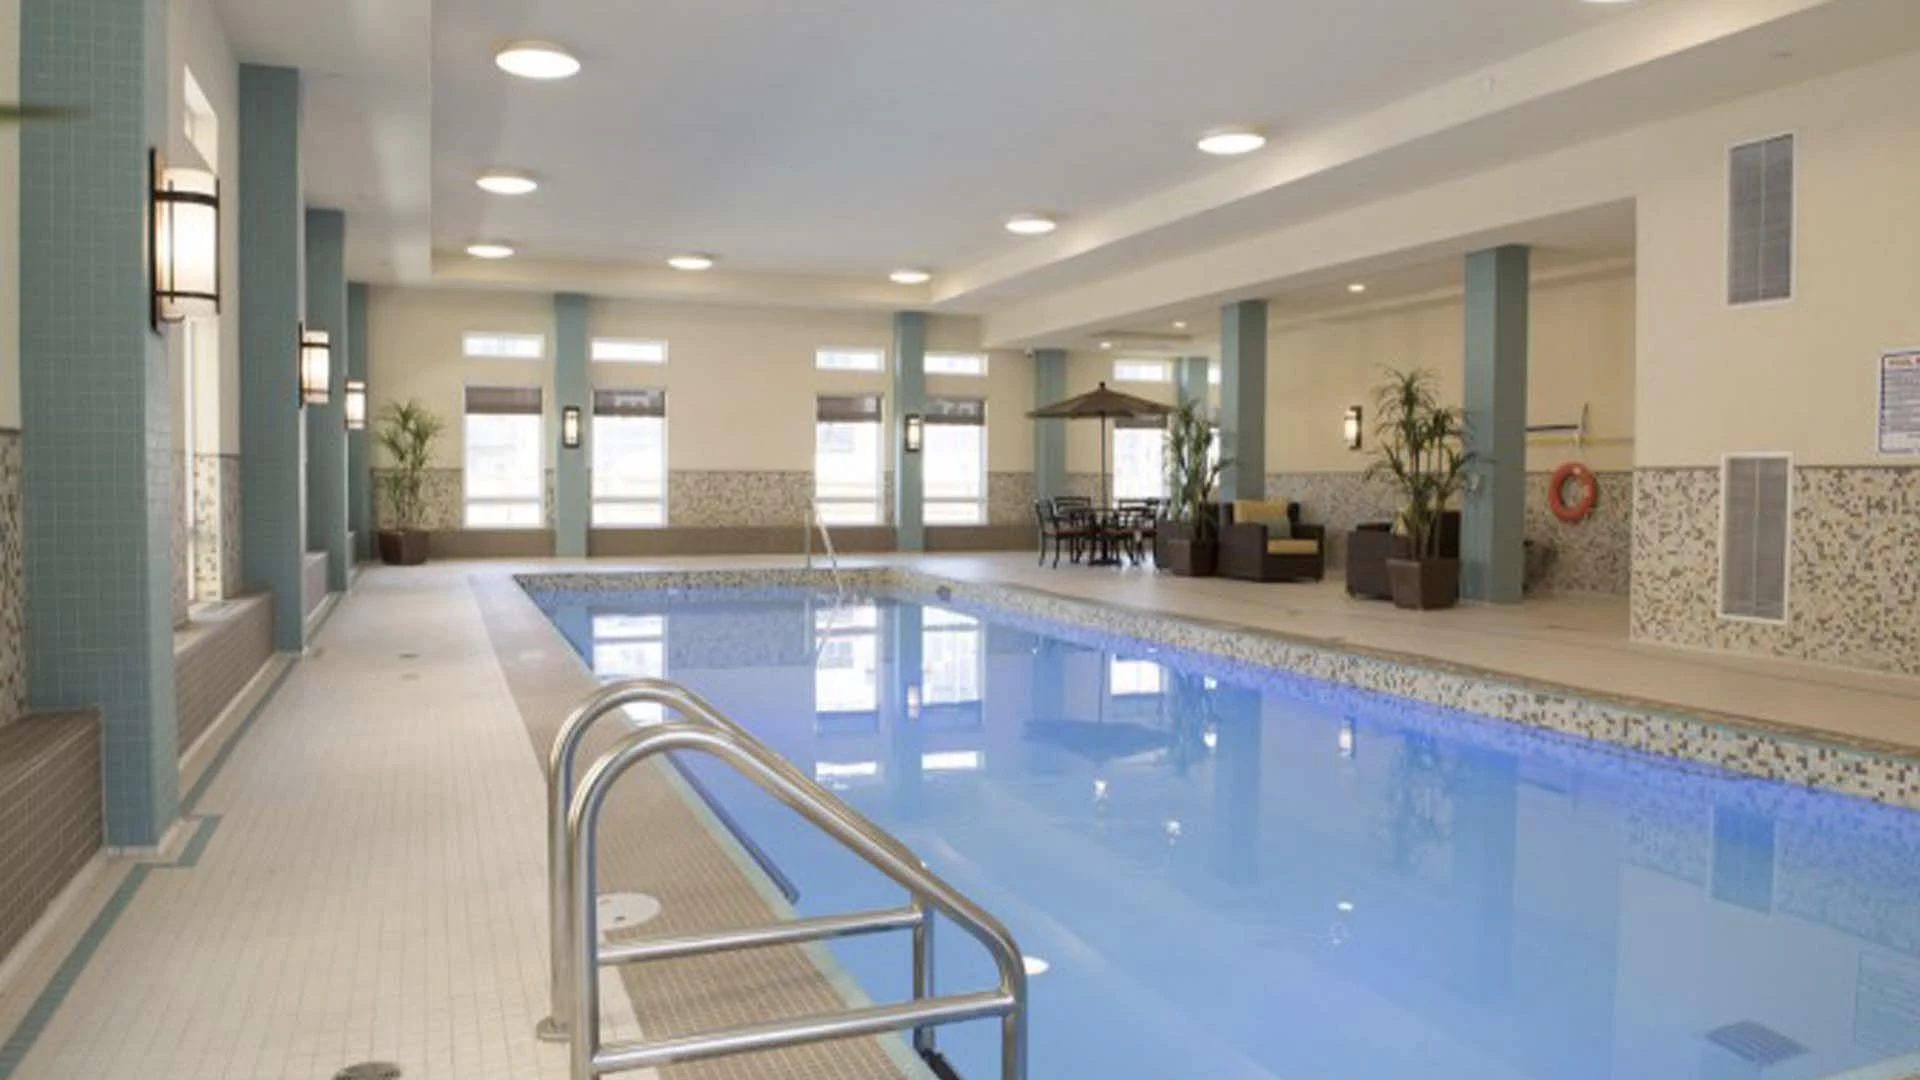 The indoor pool at Sage Hill senior living